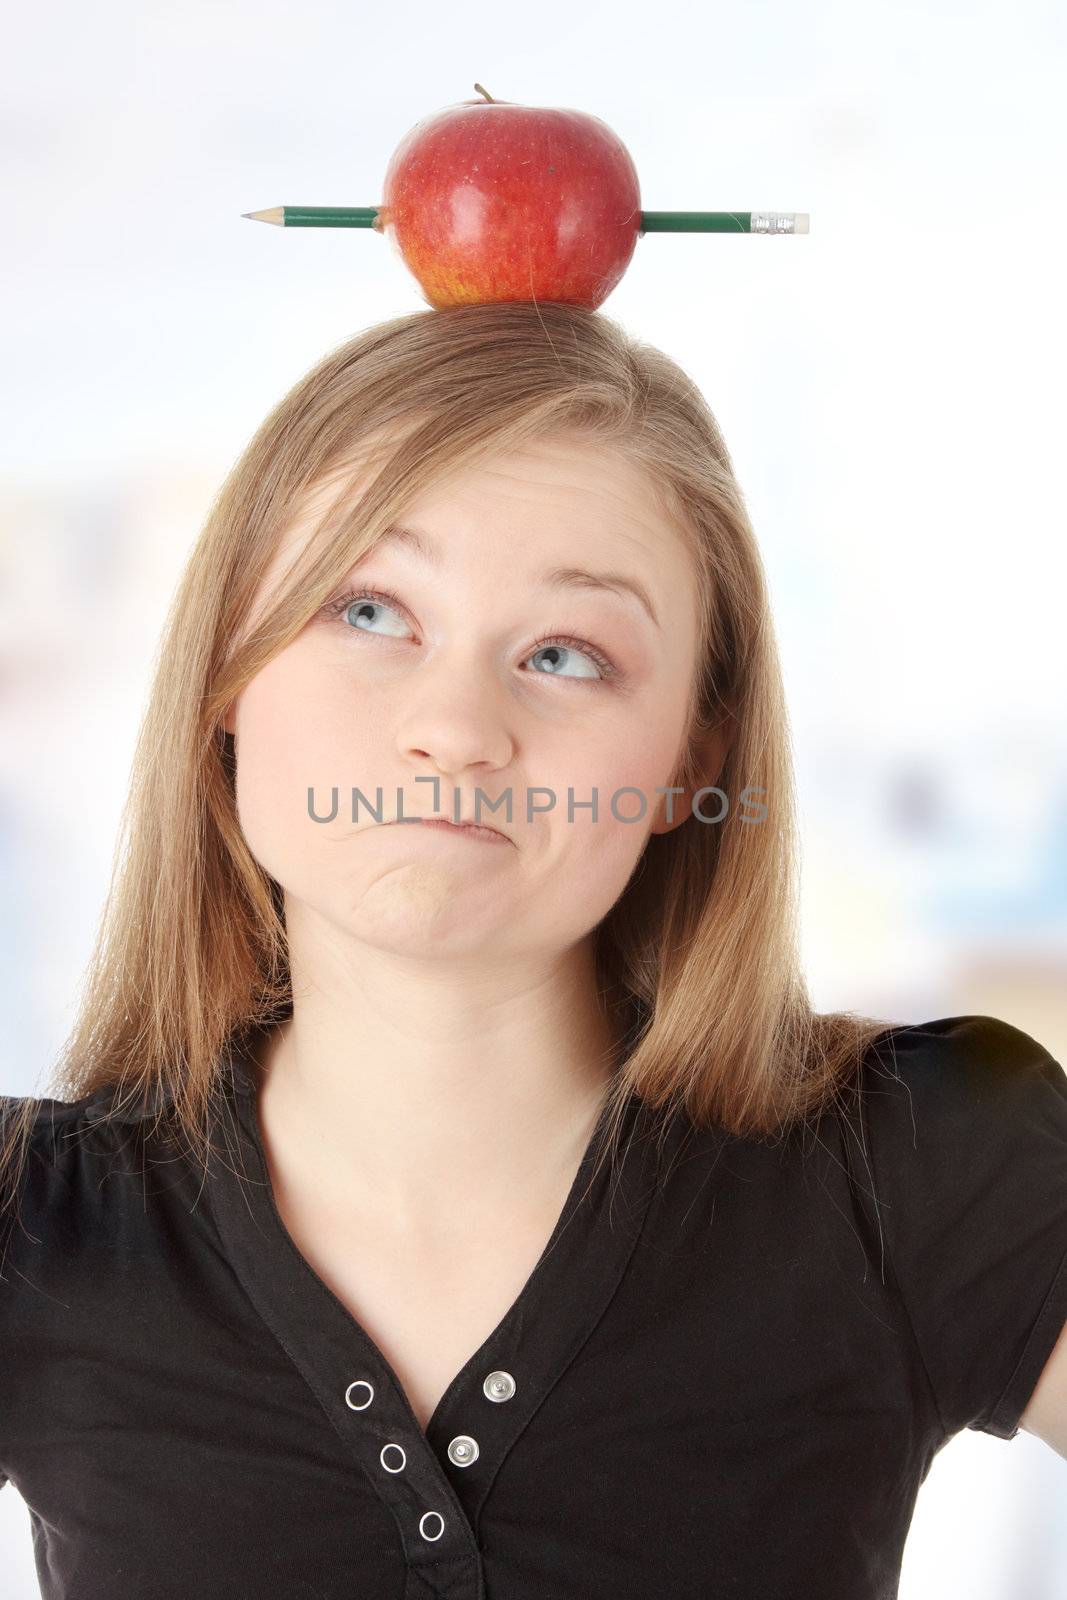 Beautiful student woman have one apple with pencil on her head - learning concept